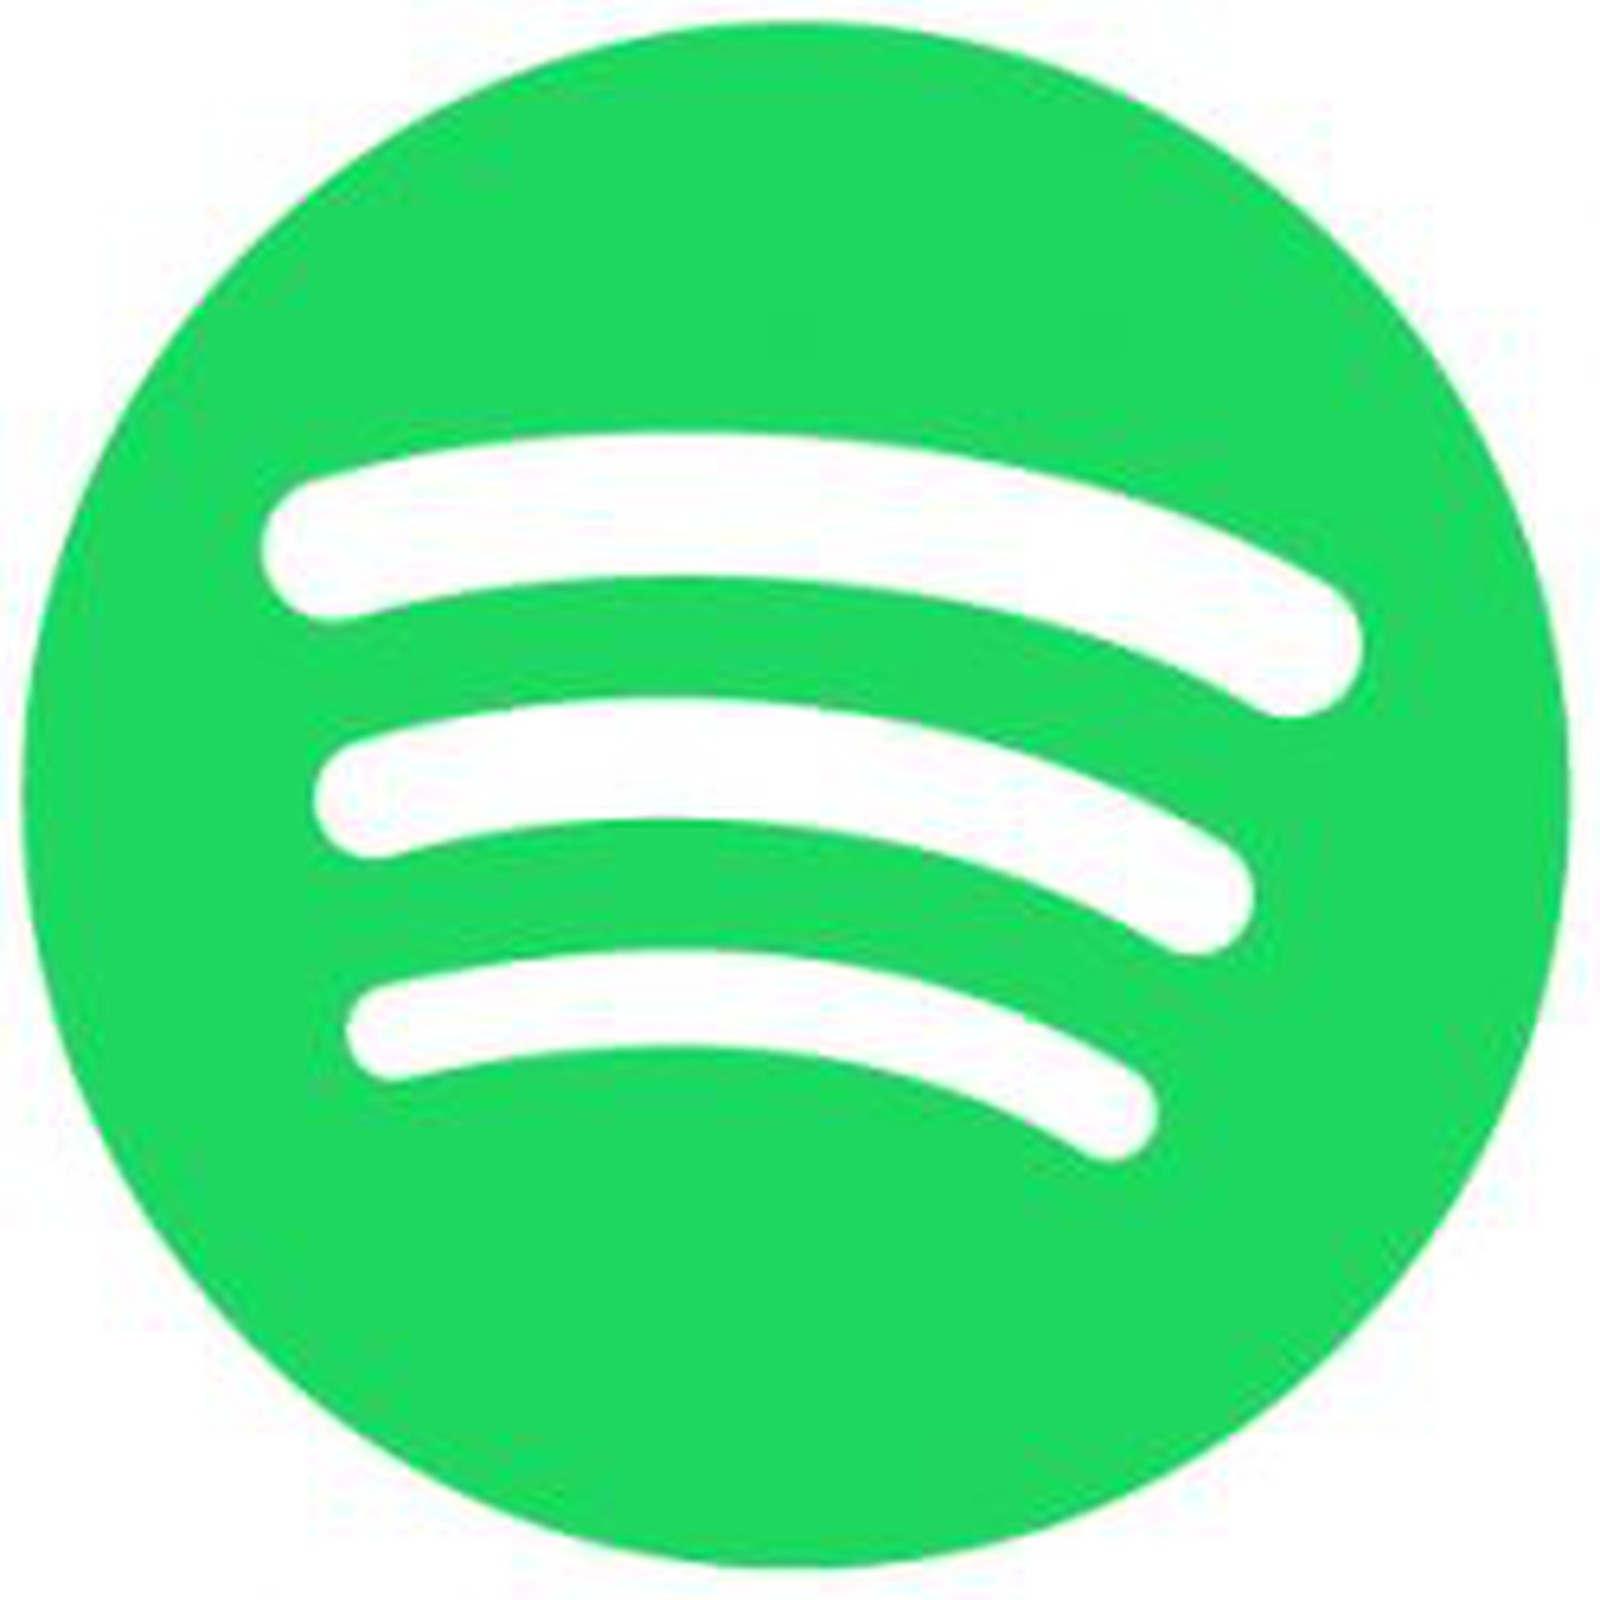 Spotify Wants Family Plan Members to Share Their Location ...